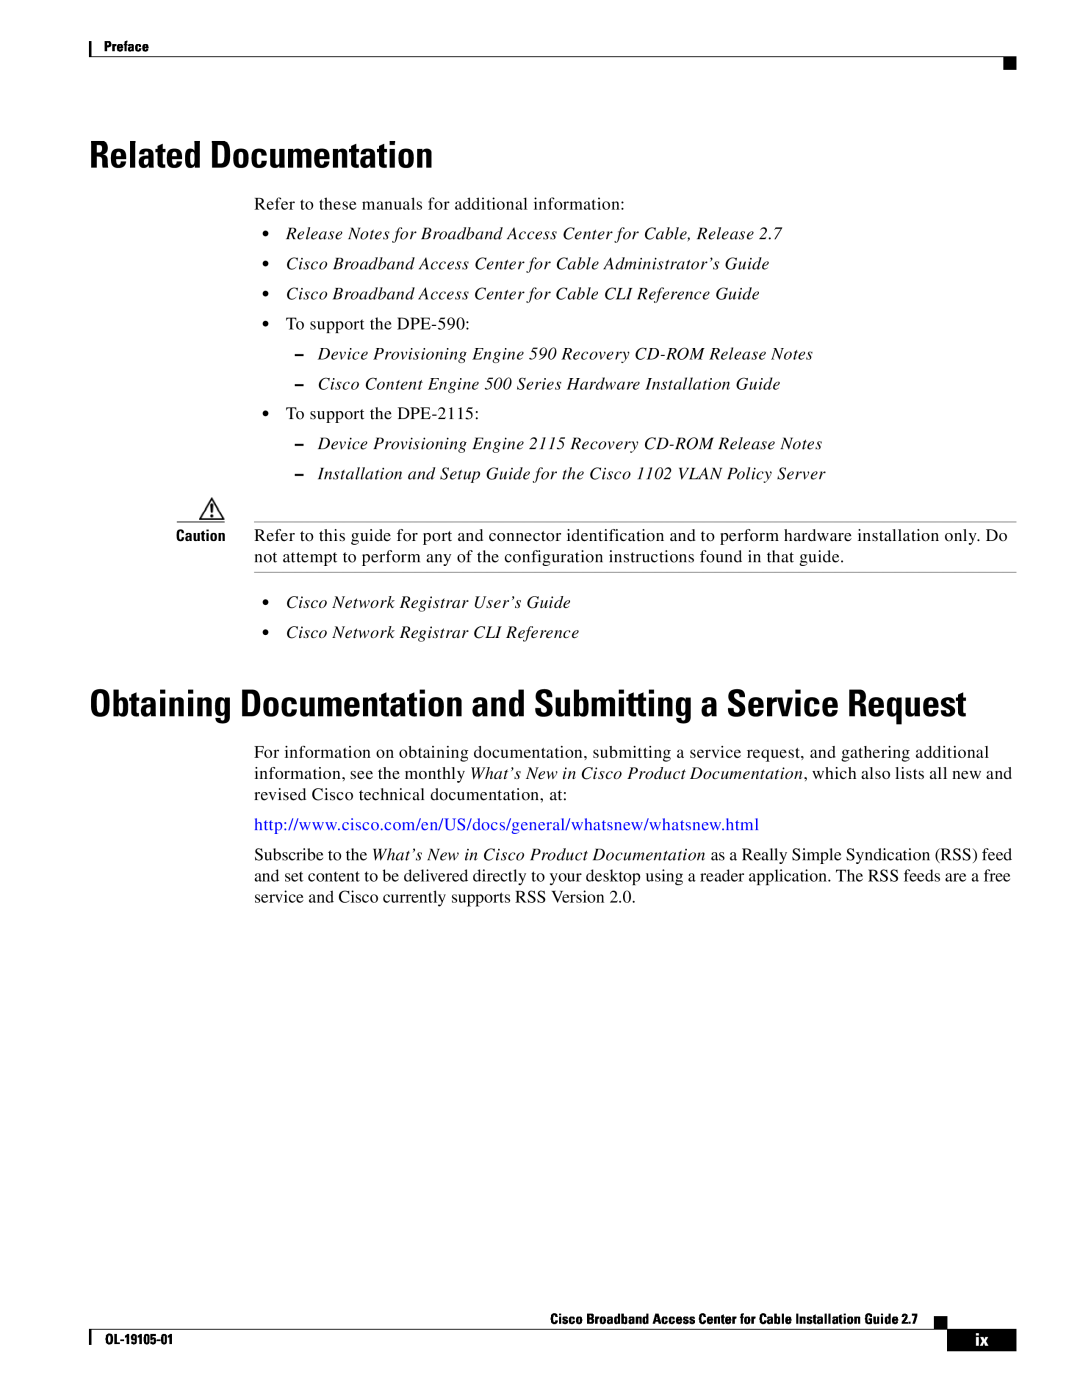 Cisco Systems Broadband Access Center Related Documentation, Obtaining Documentation and Submitting a Service Request 